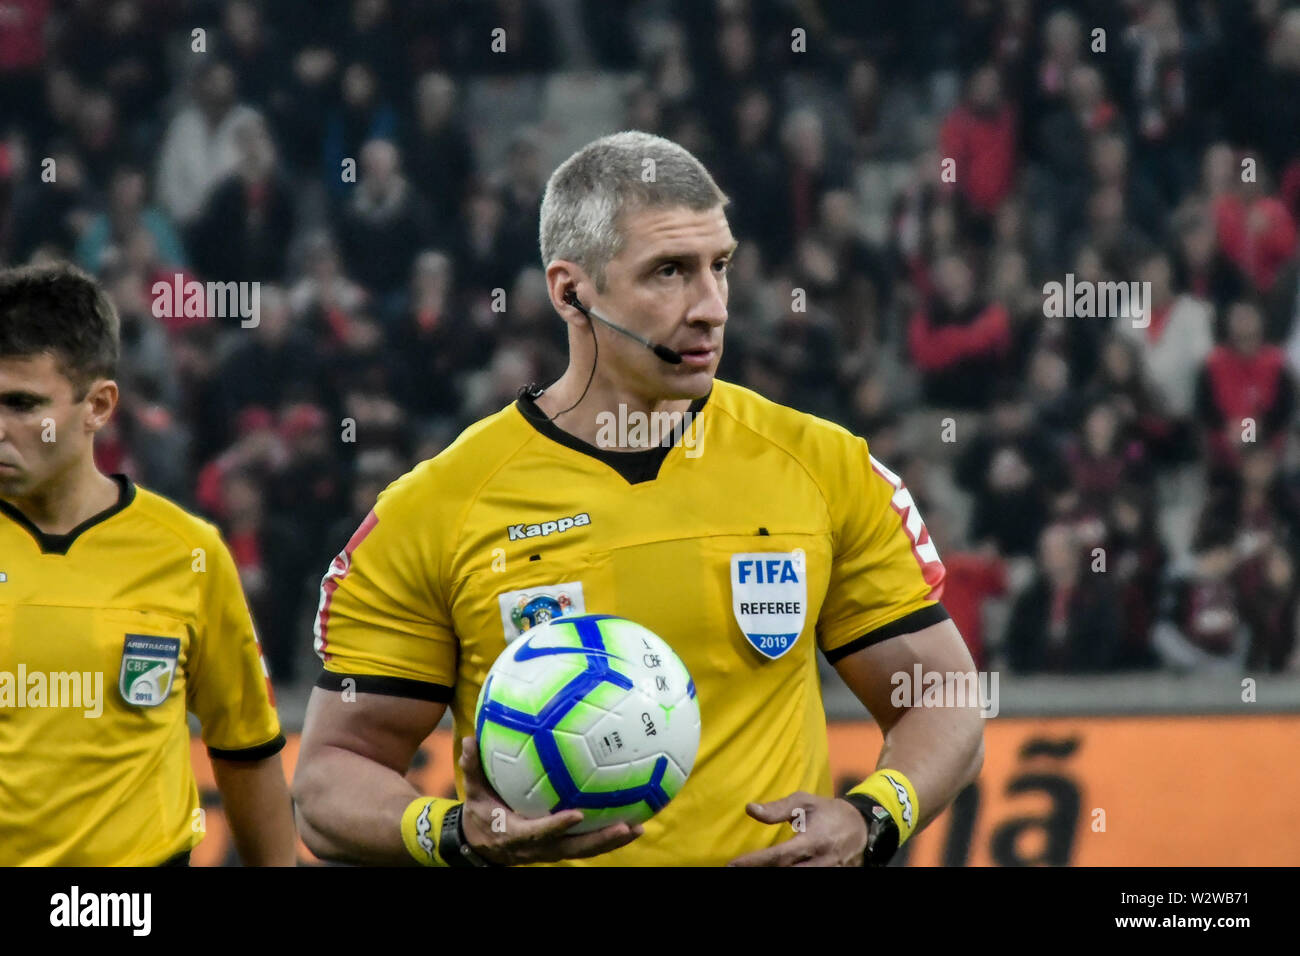 Curitiba, Brazil. 10th July, 2019. Referee Anderson Daronco during Athetico x Flamengo, a match valid for the Brazil Cup, held at the Arena da Baixada stadium, located in the city of Curitiba, on Wednesday (10). Credit: Nayra Halm/FotoArena/Alamy Live News Stock Photo